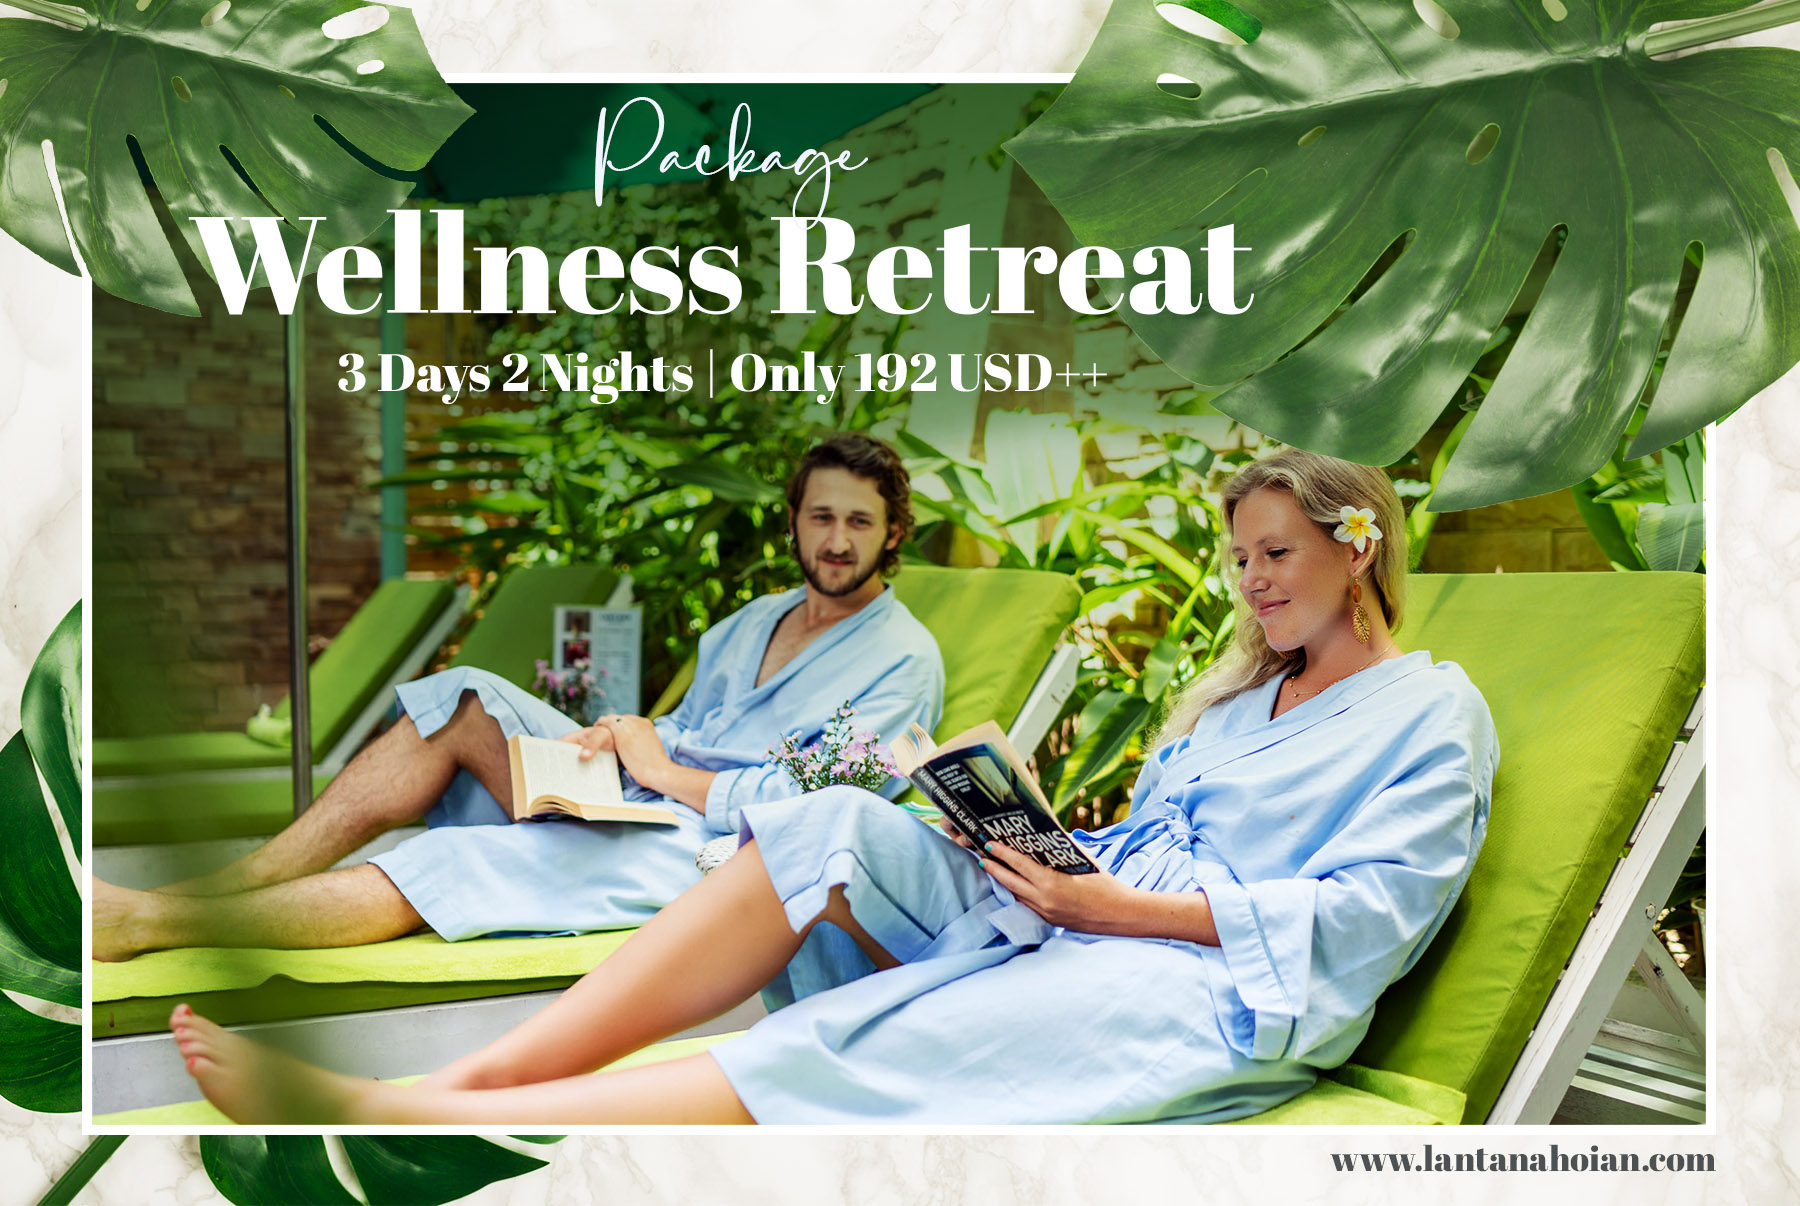 WELLNESS RETREAT PACKAGE - 3 Days 2 Nights Only 180USD++